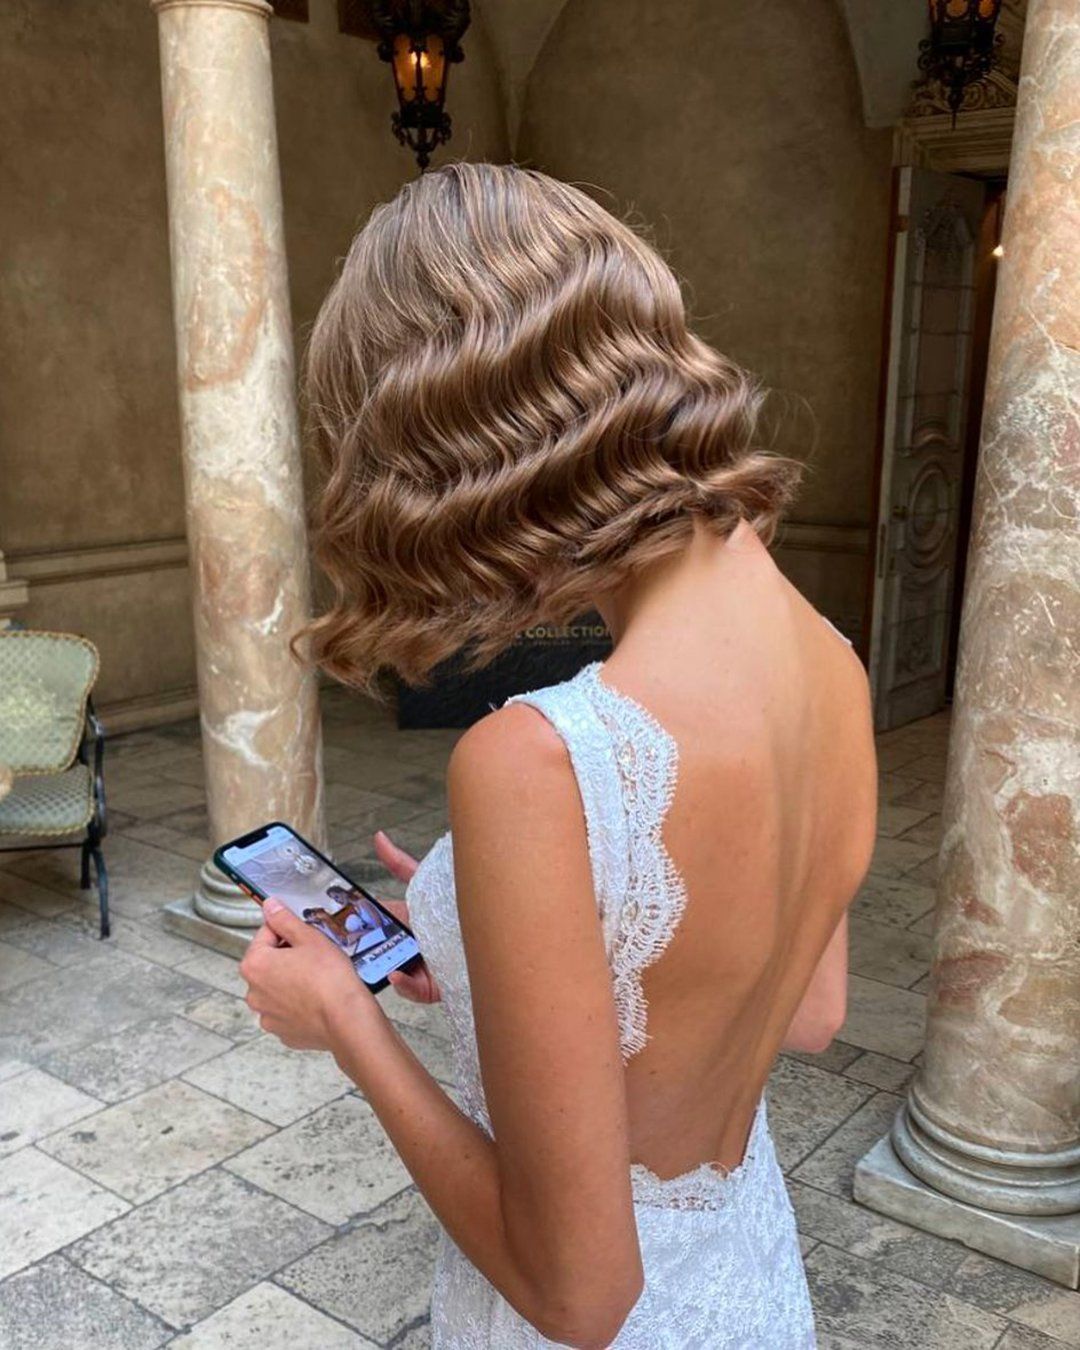 Stunning Short Hair Wedding Hairstyles to Make You Shine on Your Big Day